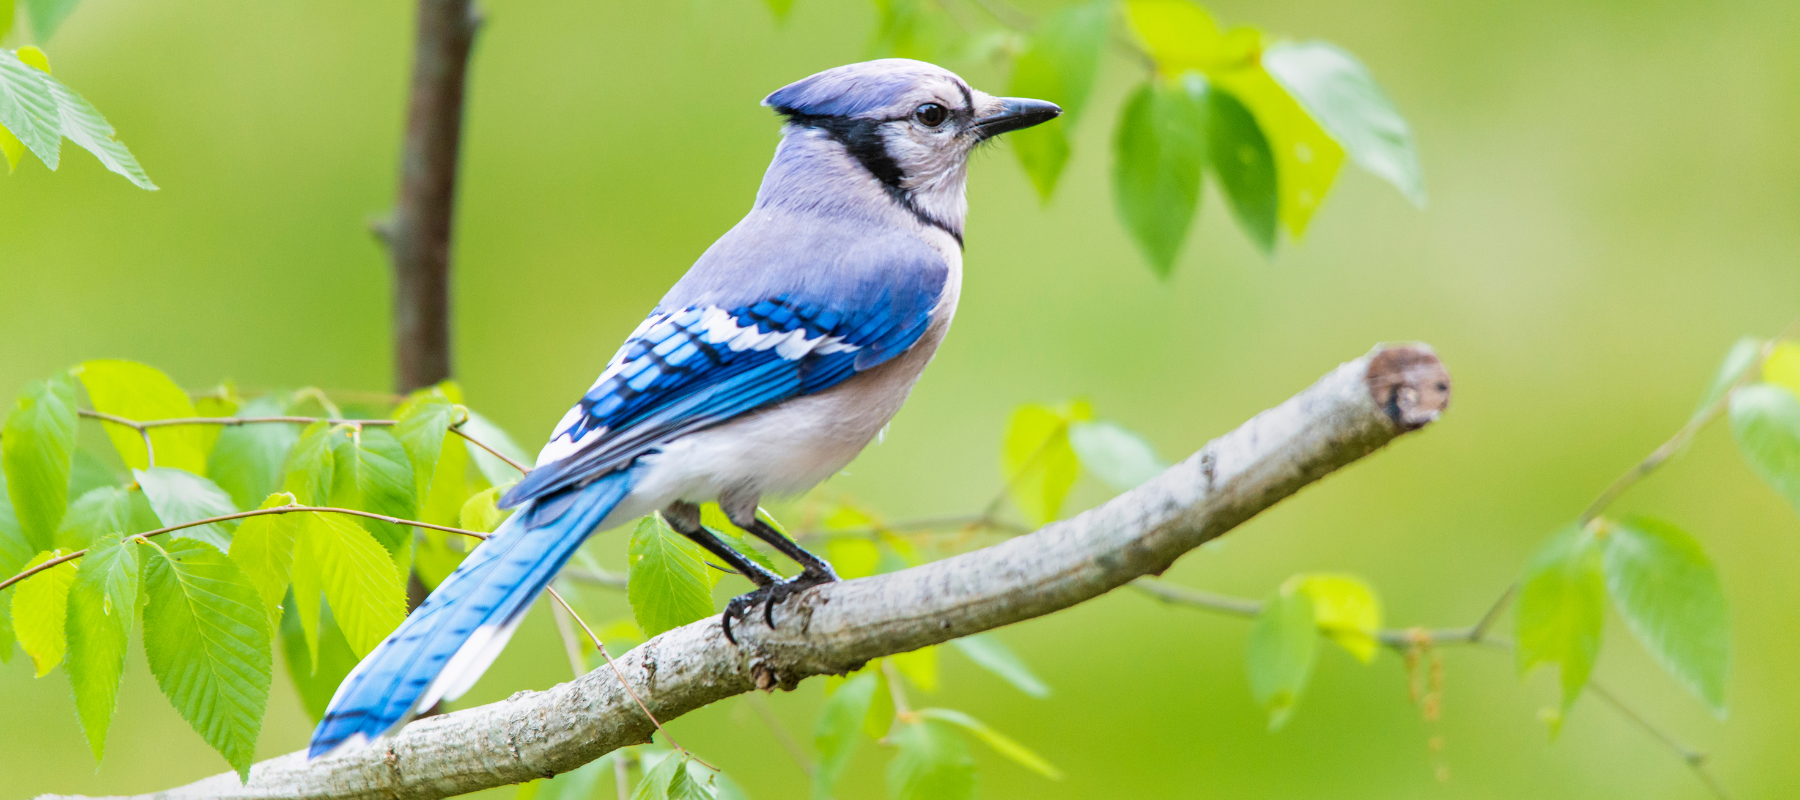 A Birdertown Guide to Attracting Blue Jays